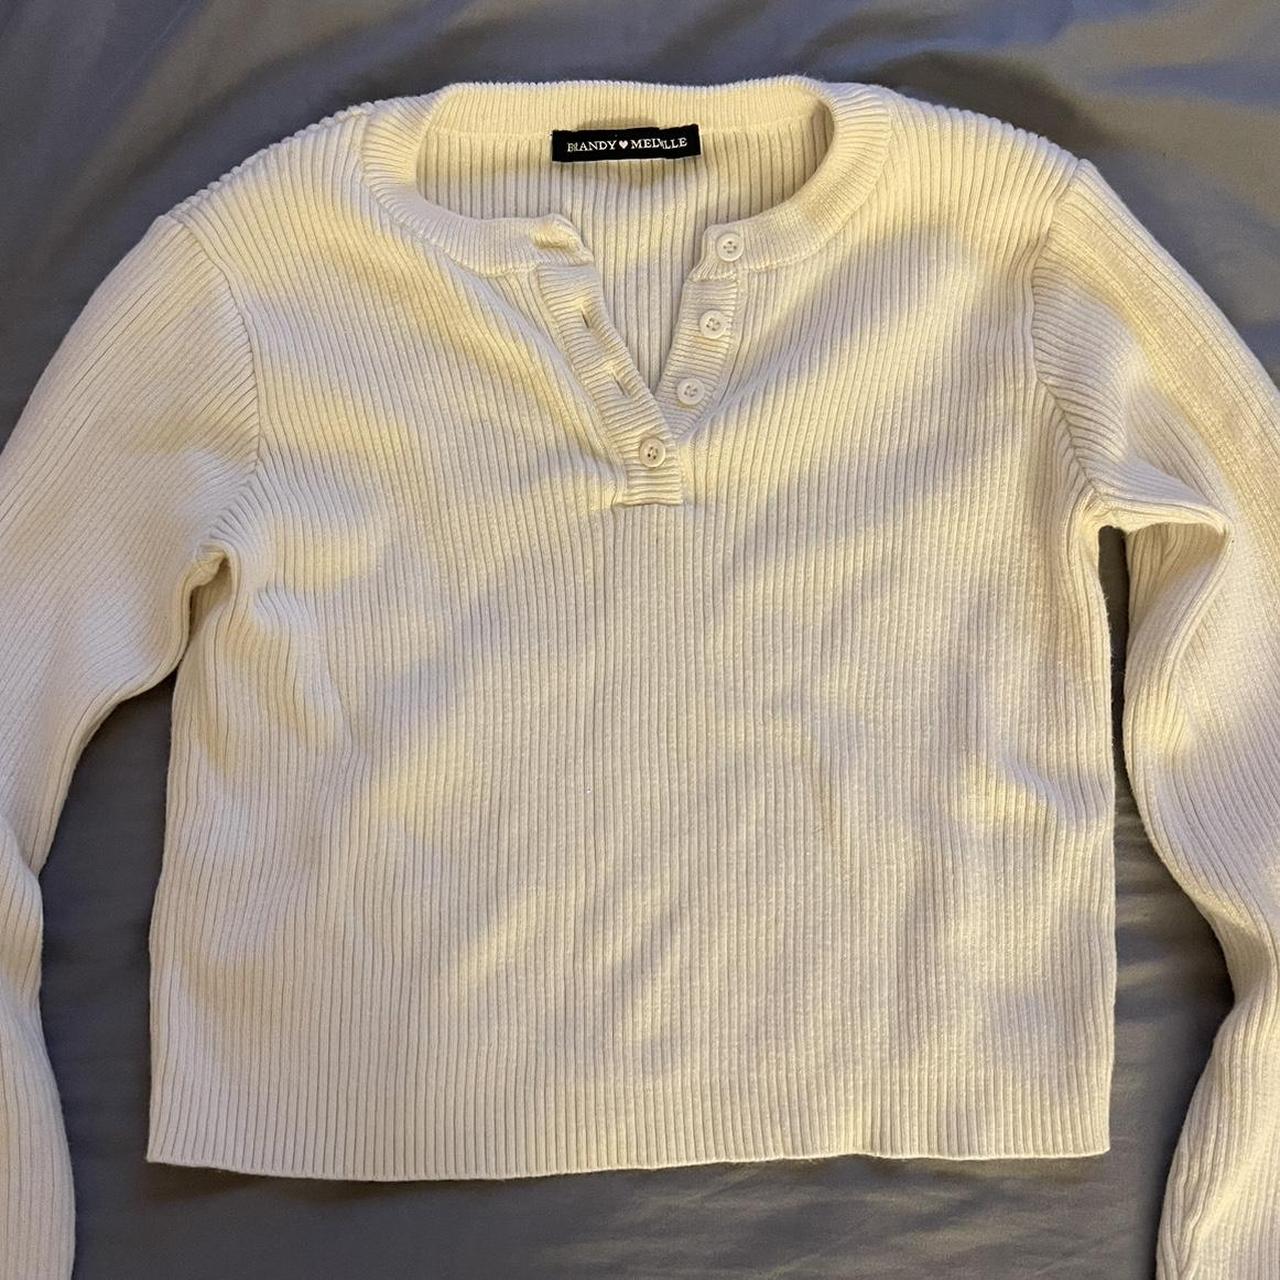 Brandy Melville Delilah Ribbed Top  Ribbed top, Tops, Long sleeve sweater